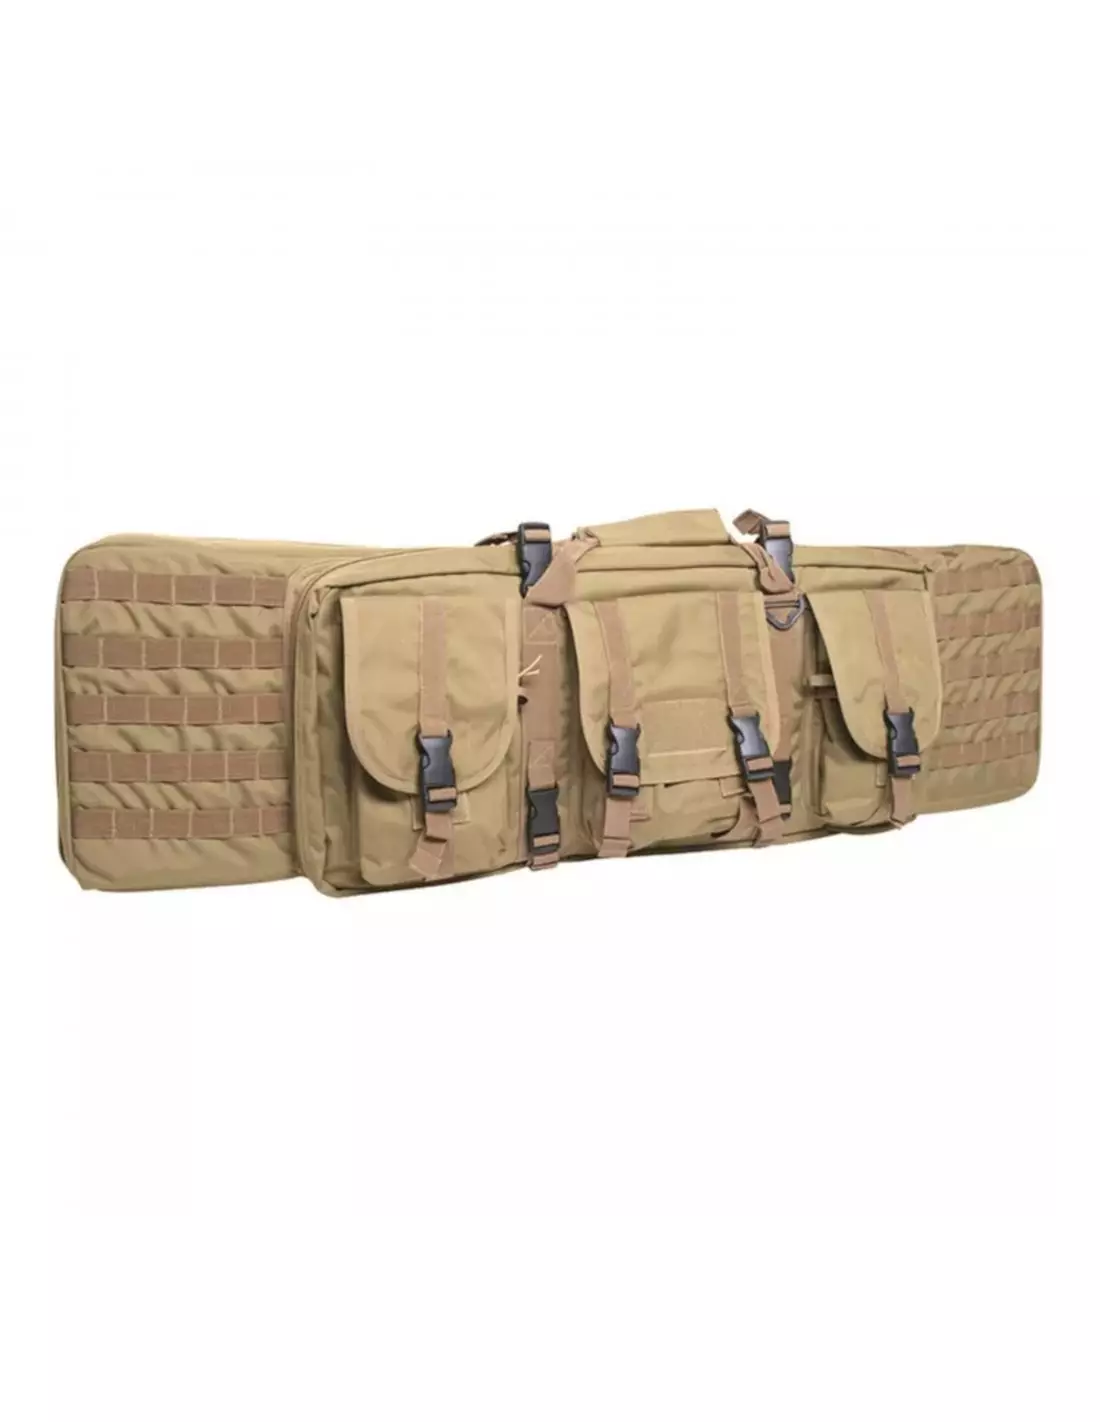 Mil-Tec® Rifle Case Large - Coyote